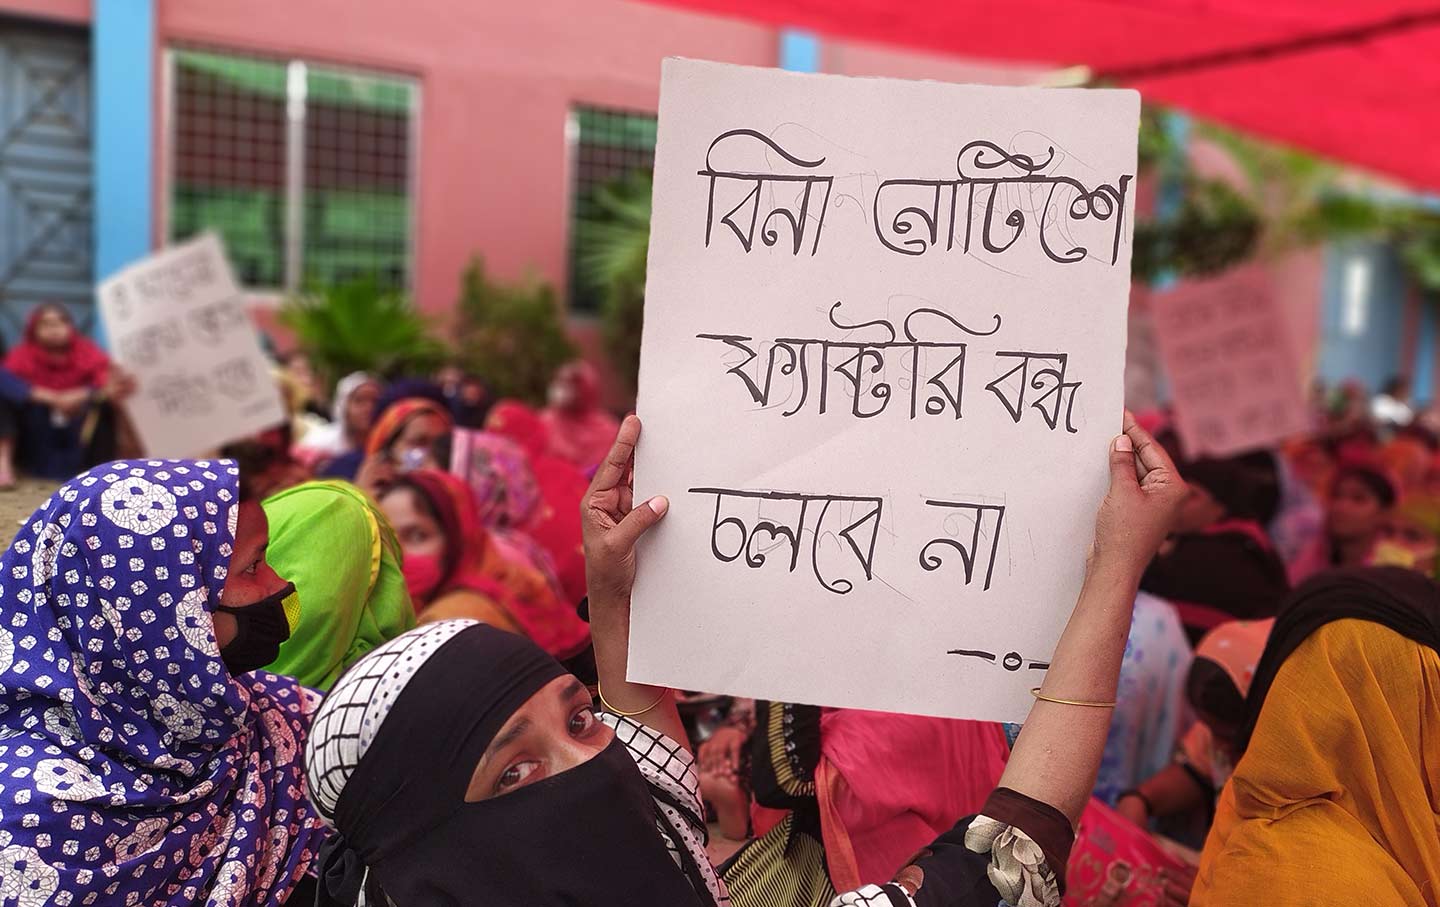 Bangladesh’s Garment Workers Are Being Treated as Disposable